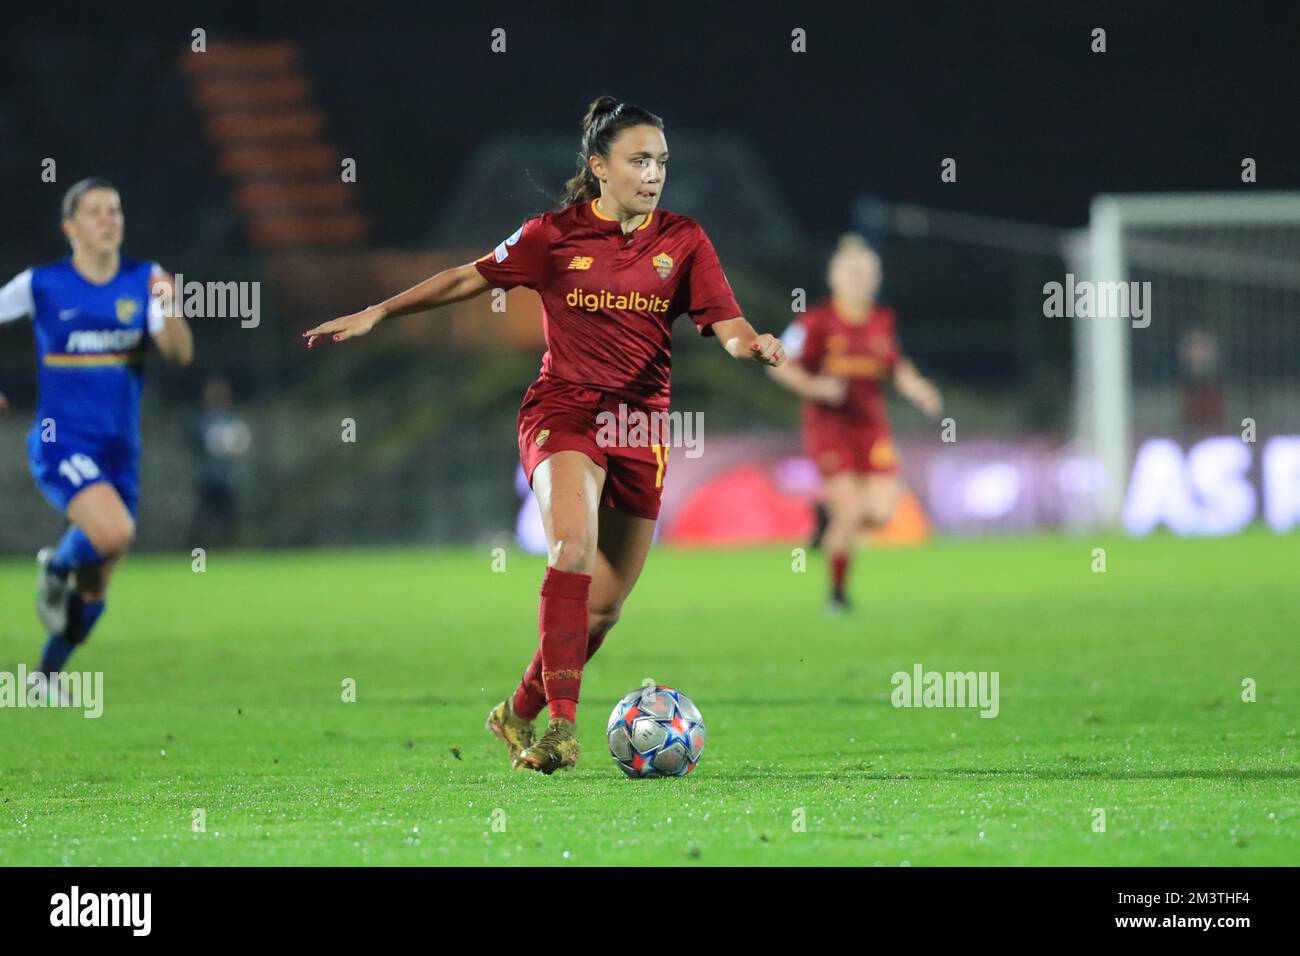 Annamaria Serturini (AS Roma) in action during the UEFA Womens Champions League group match AS Roma vs SKN St Polten at Stadio Comunale Domenico Francioni, Latina  (Tom Seiss/ SPP) Stock Photo